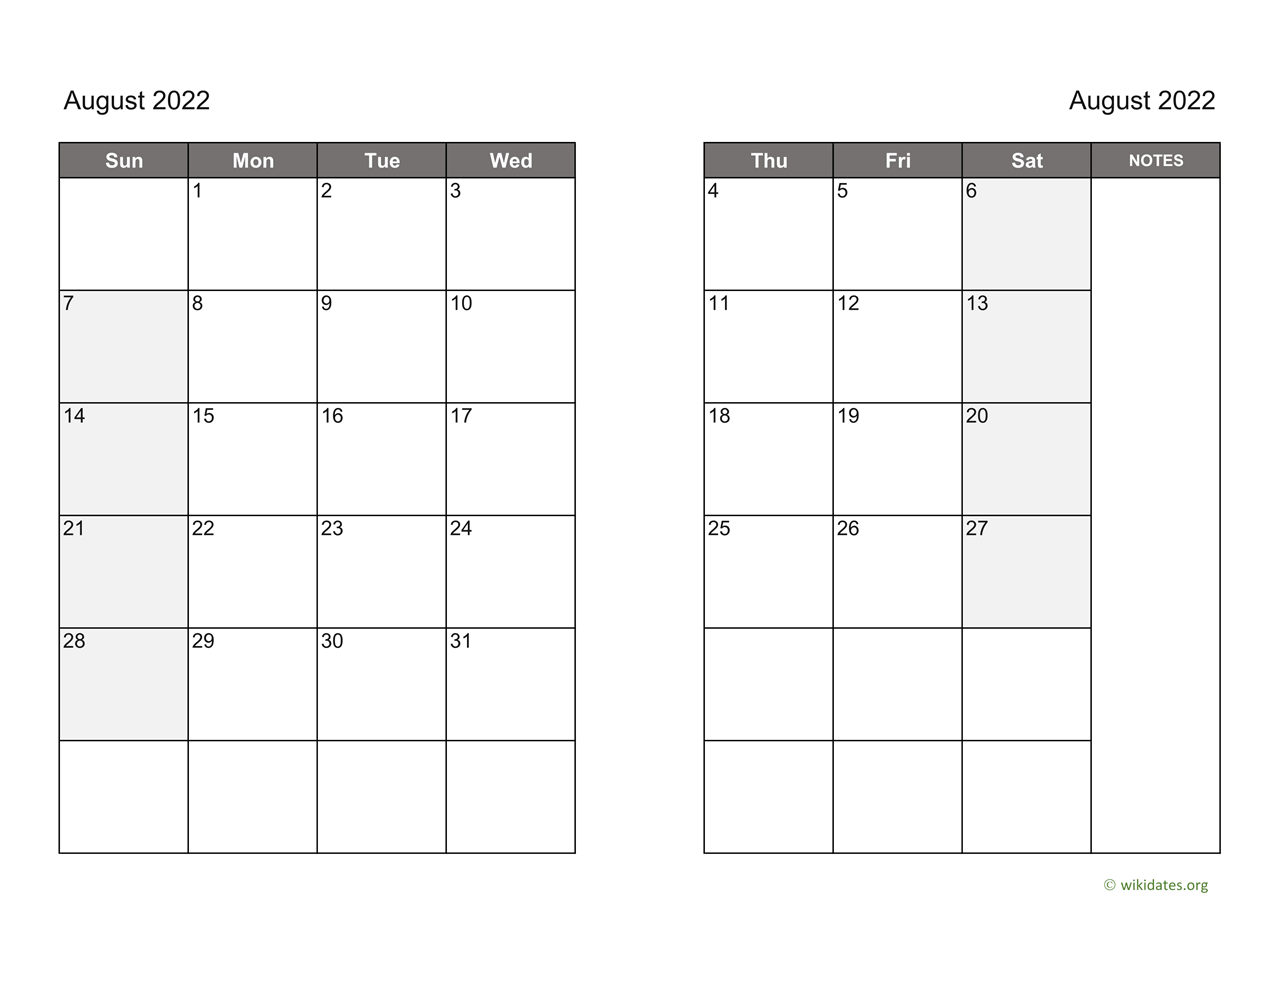 August 2022 Calendar on two pages | WikiDates.org